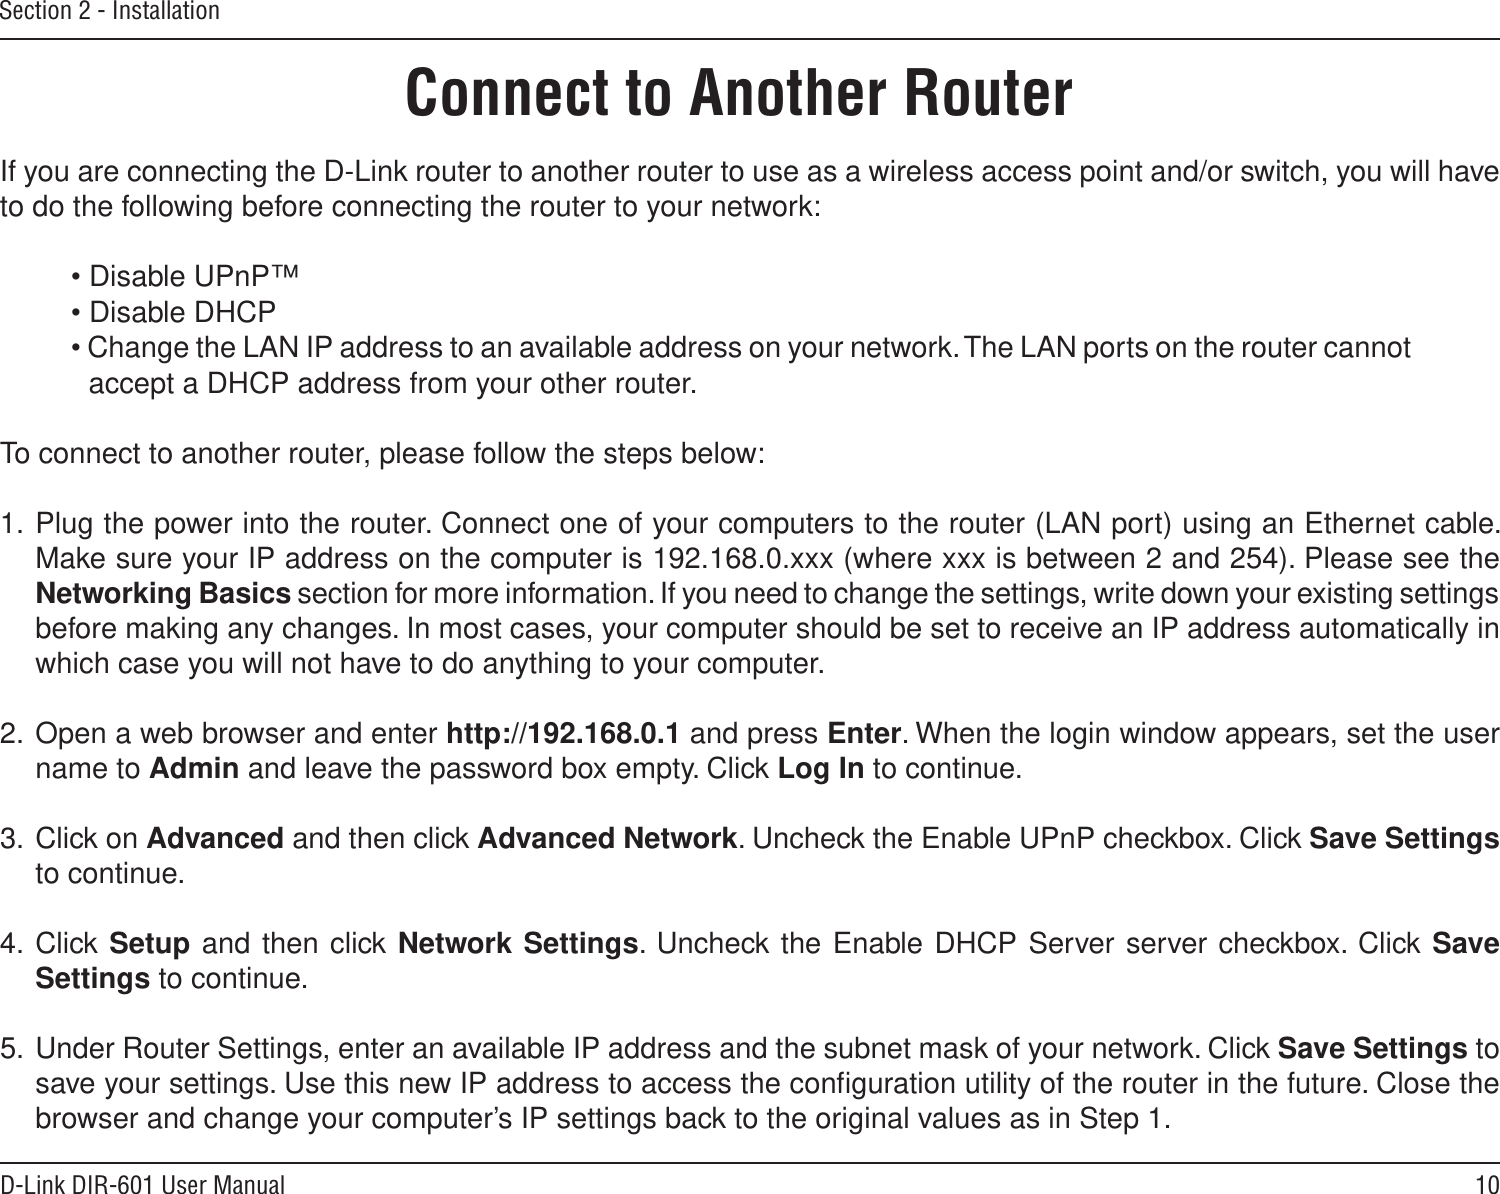 10D-Link DIR-601 User ManualSection 2 - InstallationIf you are connecting the D-Link router to another router to use as a wireless access point and/or switch, you will have to do the following before connecting the router to your network:• Disable UPnP™• Disable DHCP• Change the LAN IP address to an available address on your network. The LAN ports on the router cannot accept a DHCP address from your other router.To connect to another router, please follow the steps below:1.  Plug the power into the router. Connect one of your computers to the router (LAN port) using an Ethernet cable. Make sure your IP address on the computer is 192.168.0.xxx (where xxx is between 2 and 254). Please see the Networking Basics section for more information. If you need to change the settings, write down your existing settings before making any changes. In most cases, your computer should be set to receive an IP address automatically in which case you will not have to do anything to your computer.2.  Open a web browser and enter http://192.168.0.1 and press Enter. When the login window appears, set the user name to Admin and leave the password box empty. Click Log In to continue.3.  Click on Advanced and then click Advanced Network. Uncheck the Enable UPnP checkbox. Click Save Settings to continue. 4.  Click Setup and then click Network Settings. Uncheck the Enable DHCP Server server checkbox. Click Save Settings to continue.5.  Under Router Settings, enter an available IP address and the subnet mask of your network. Click Save Settings to save your settings. Use this new IP address to access the conﬁguration utility of the router in the future. Close the browser and change your computer’s IP settings back to the original values as in Step 1.Connect to Another Router